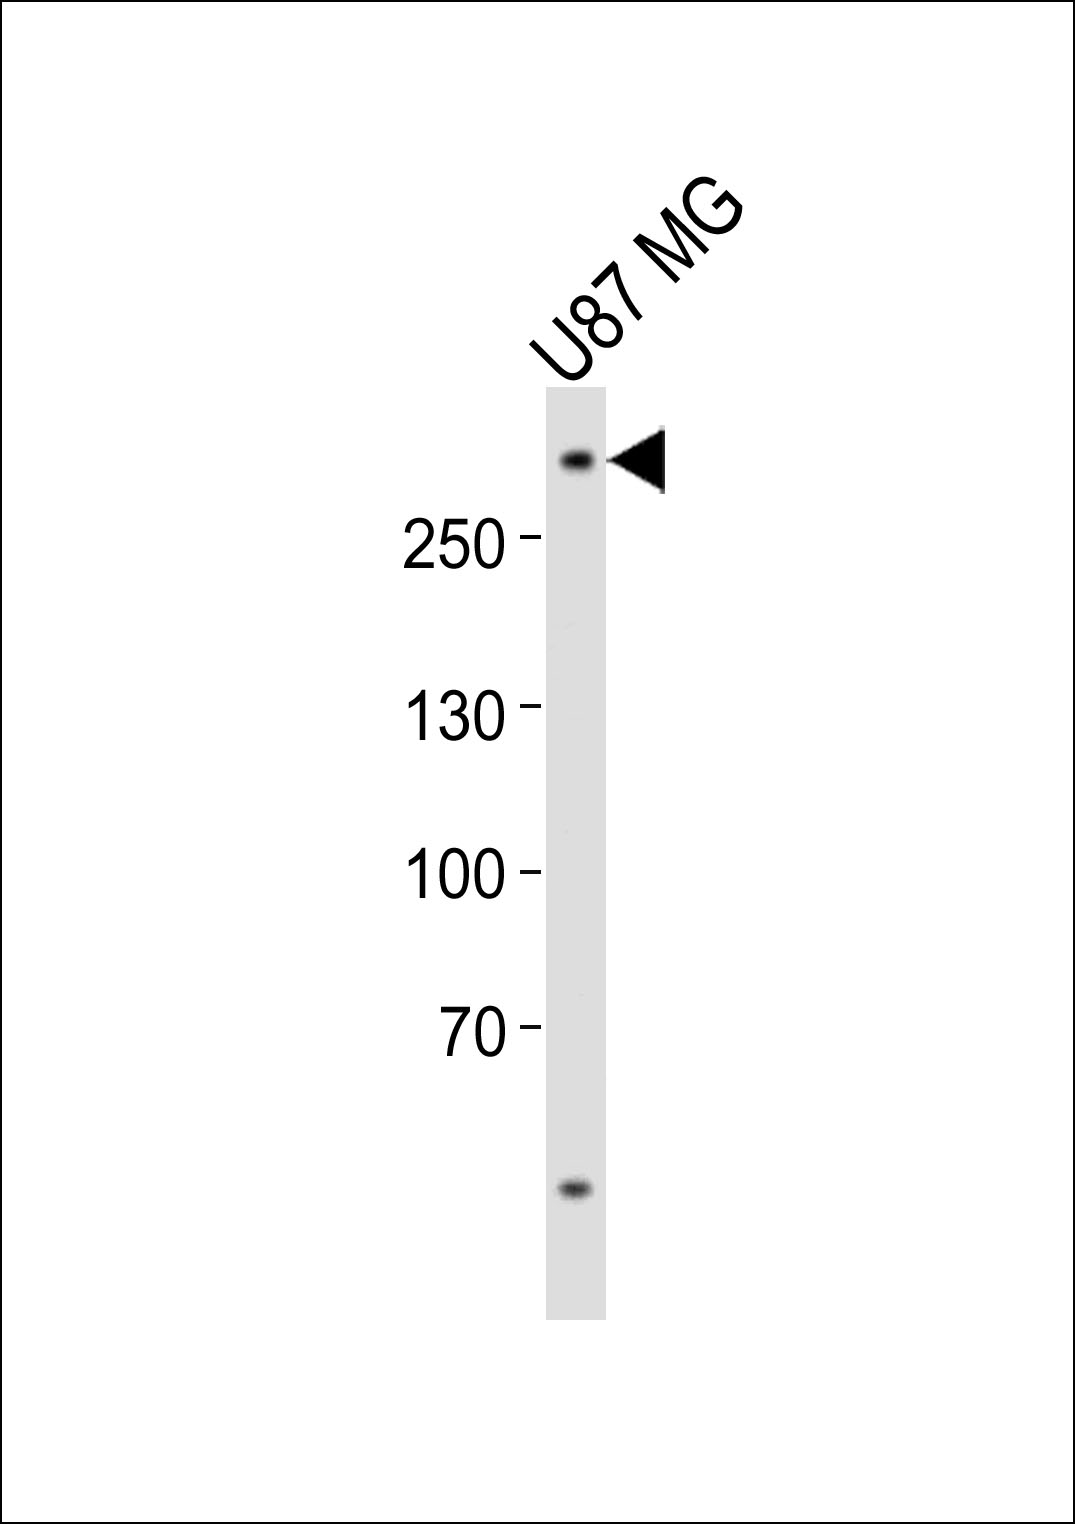 Western blot analysis of lysate from U-87 MG cell line,  using ABCA2 Antibody (Center)(Cat.  #AP21066a).  AP21066a was diluted at 1:1000.  A goat anti-rabbit IgG H&L(HRP) at 1:10000 dilution was used as the secondary antibody. Lysate at 20ug.